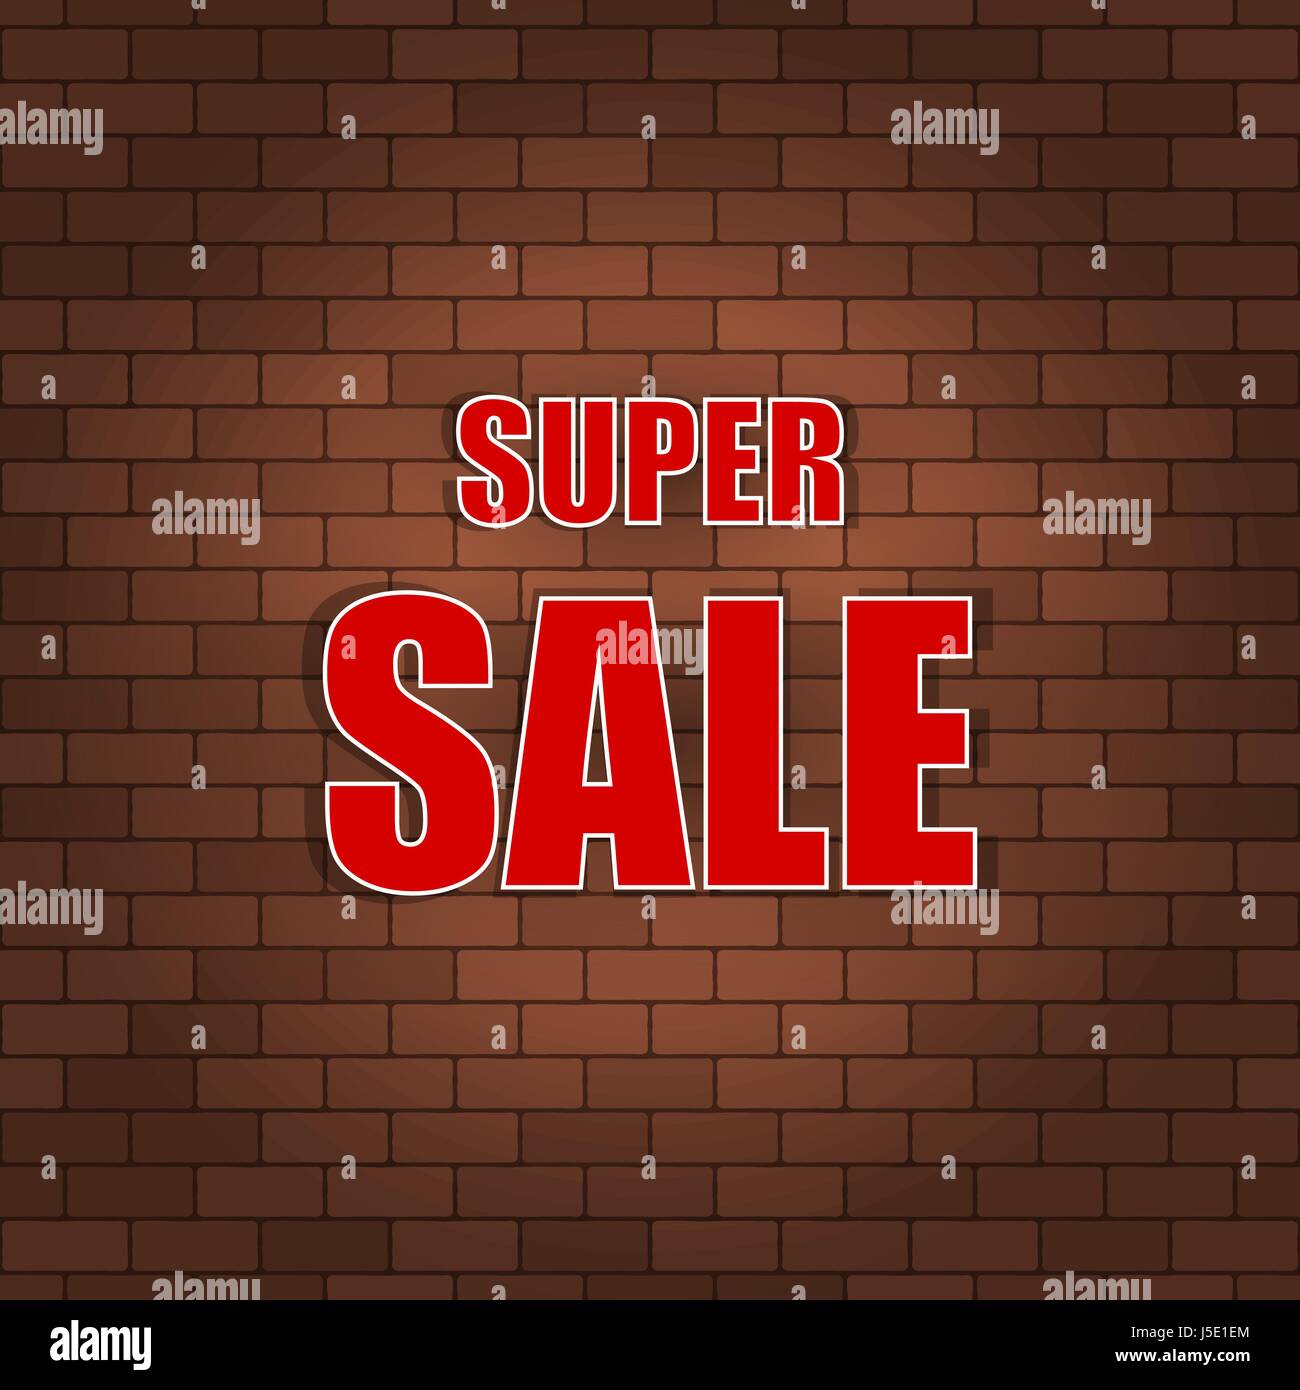 Super sale banner on a brick wall. Vector illustration Stock Vector